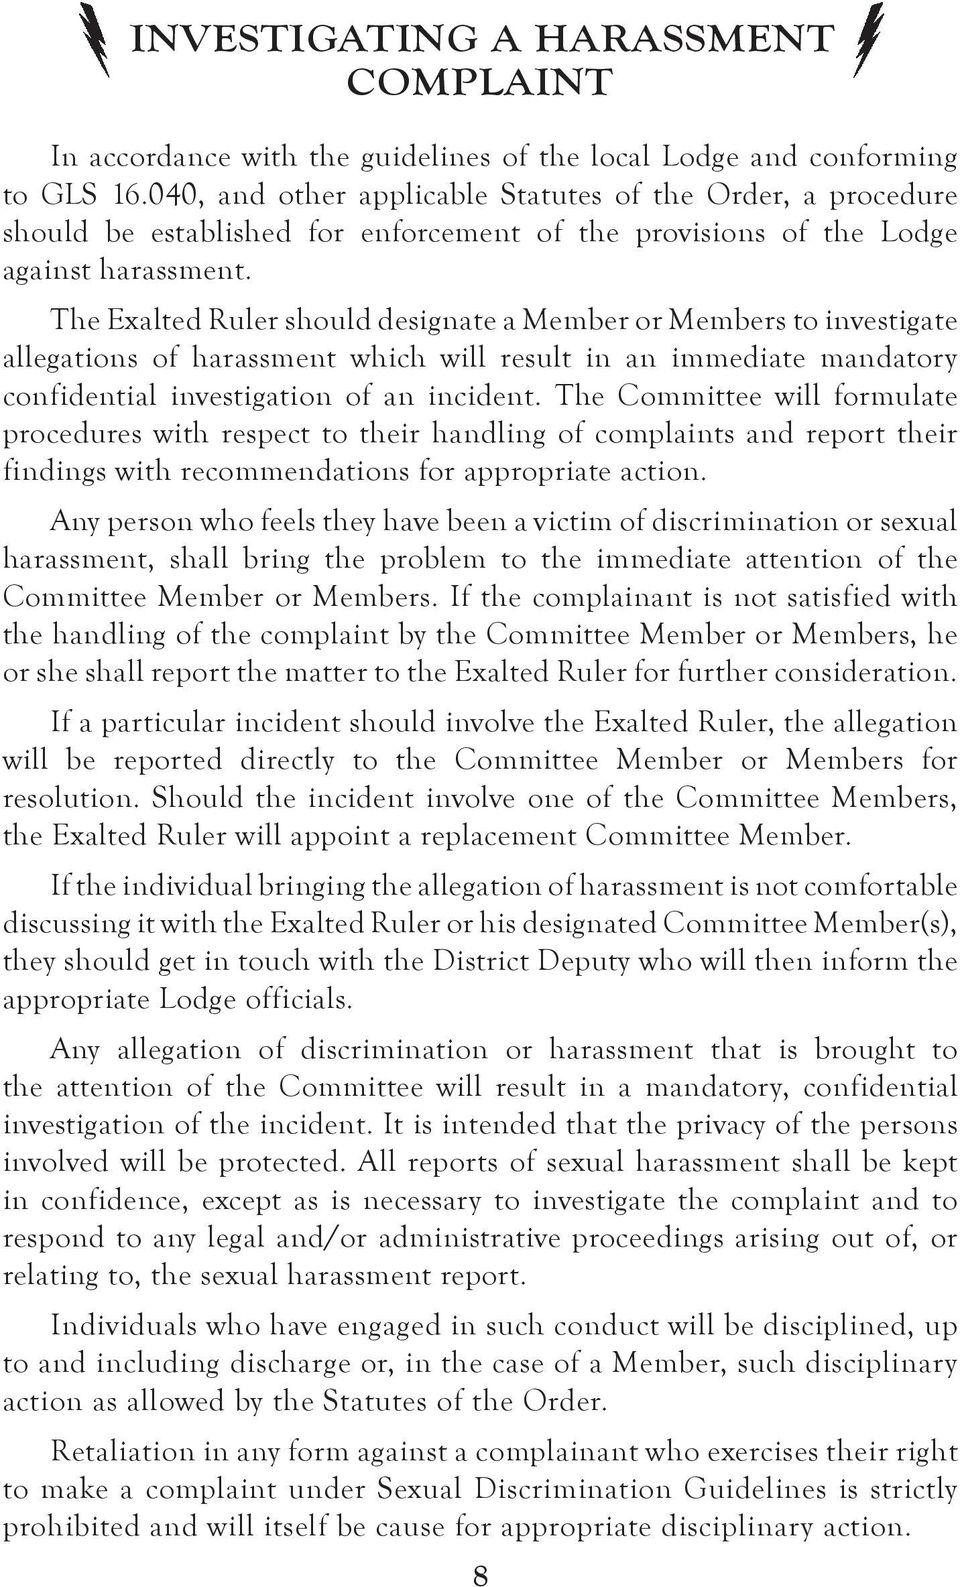 The Exalted Ruler should designate a Member or Members to investigate allegations of harassment which will result in an immediate mandatory confidential investigation of an incident.